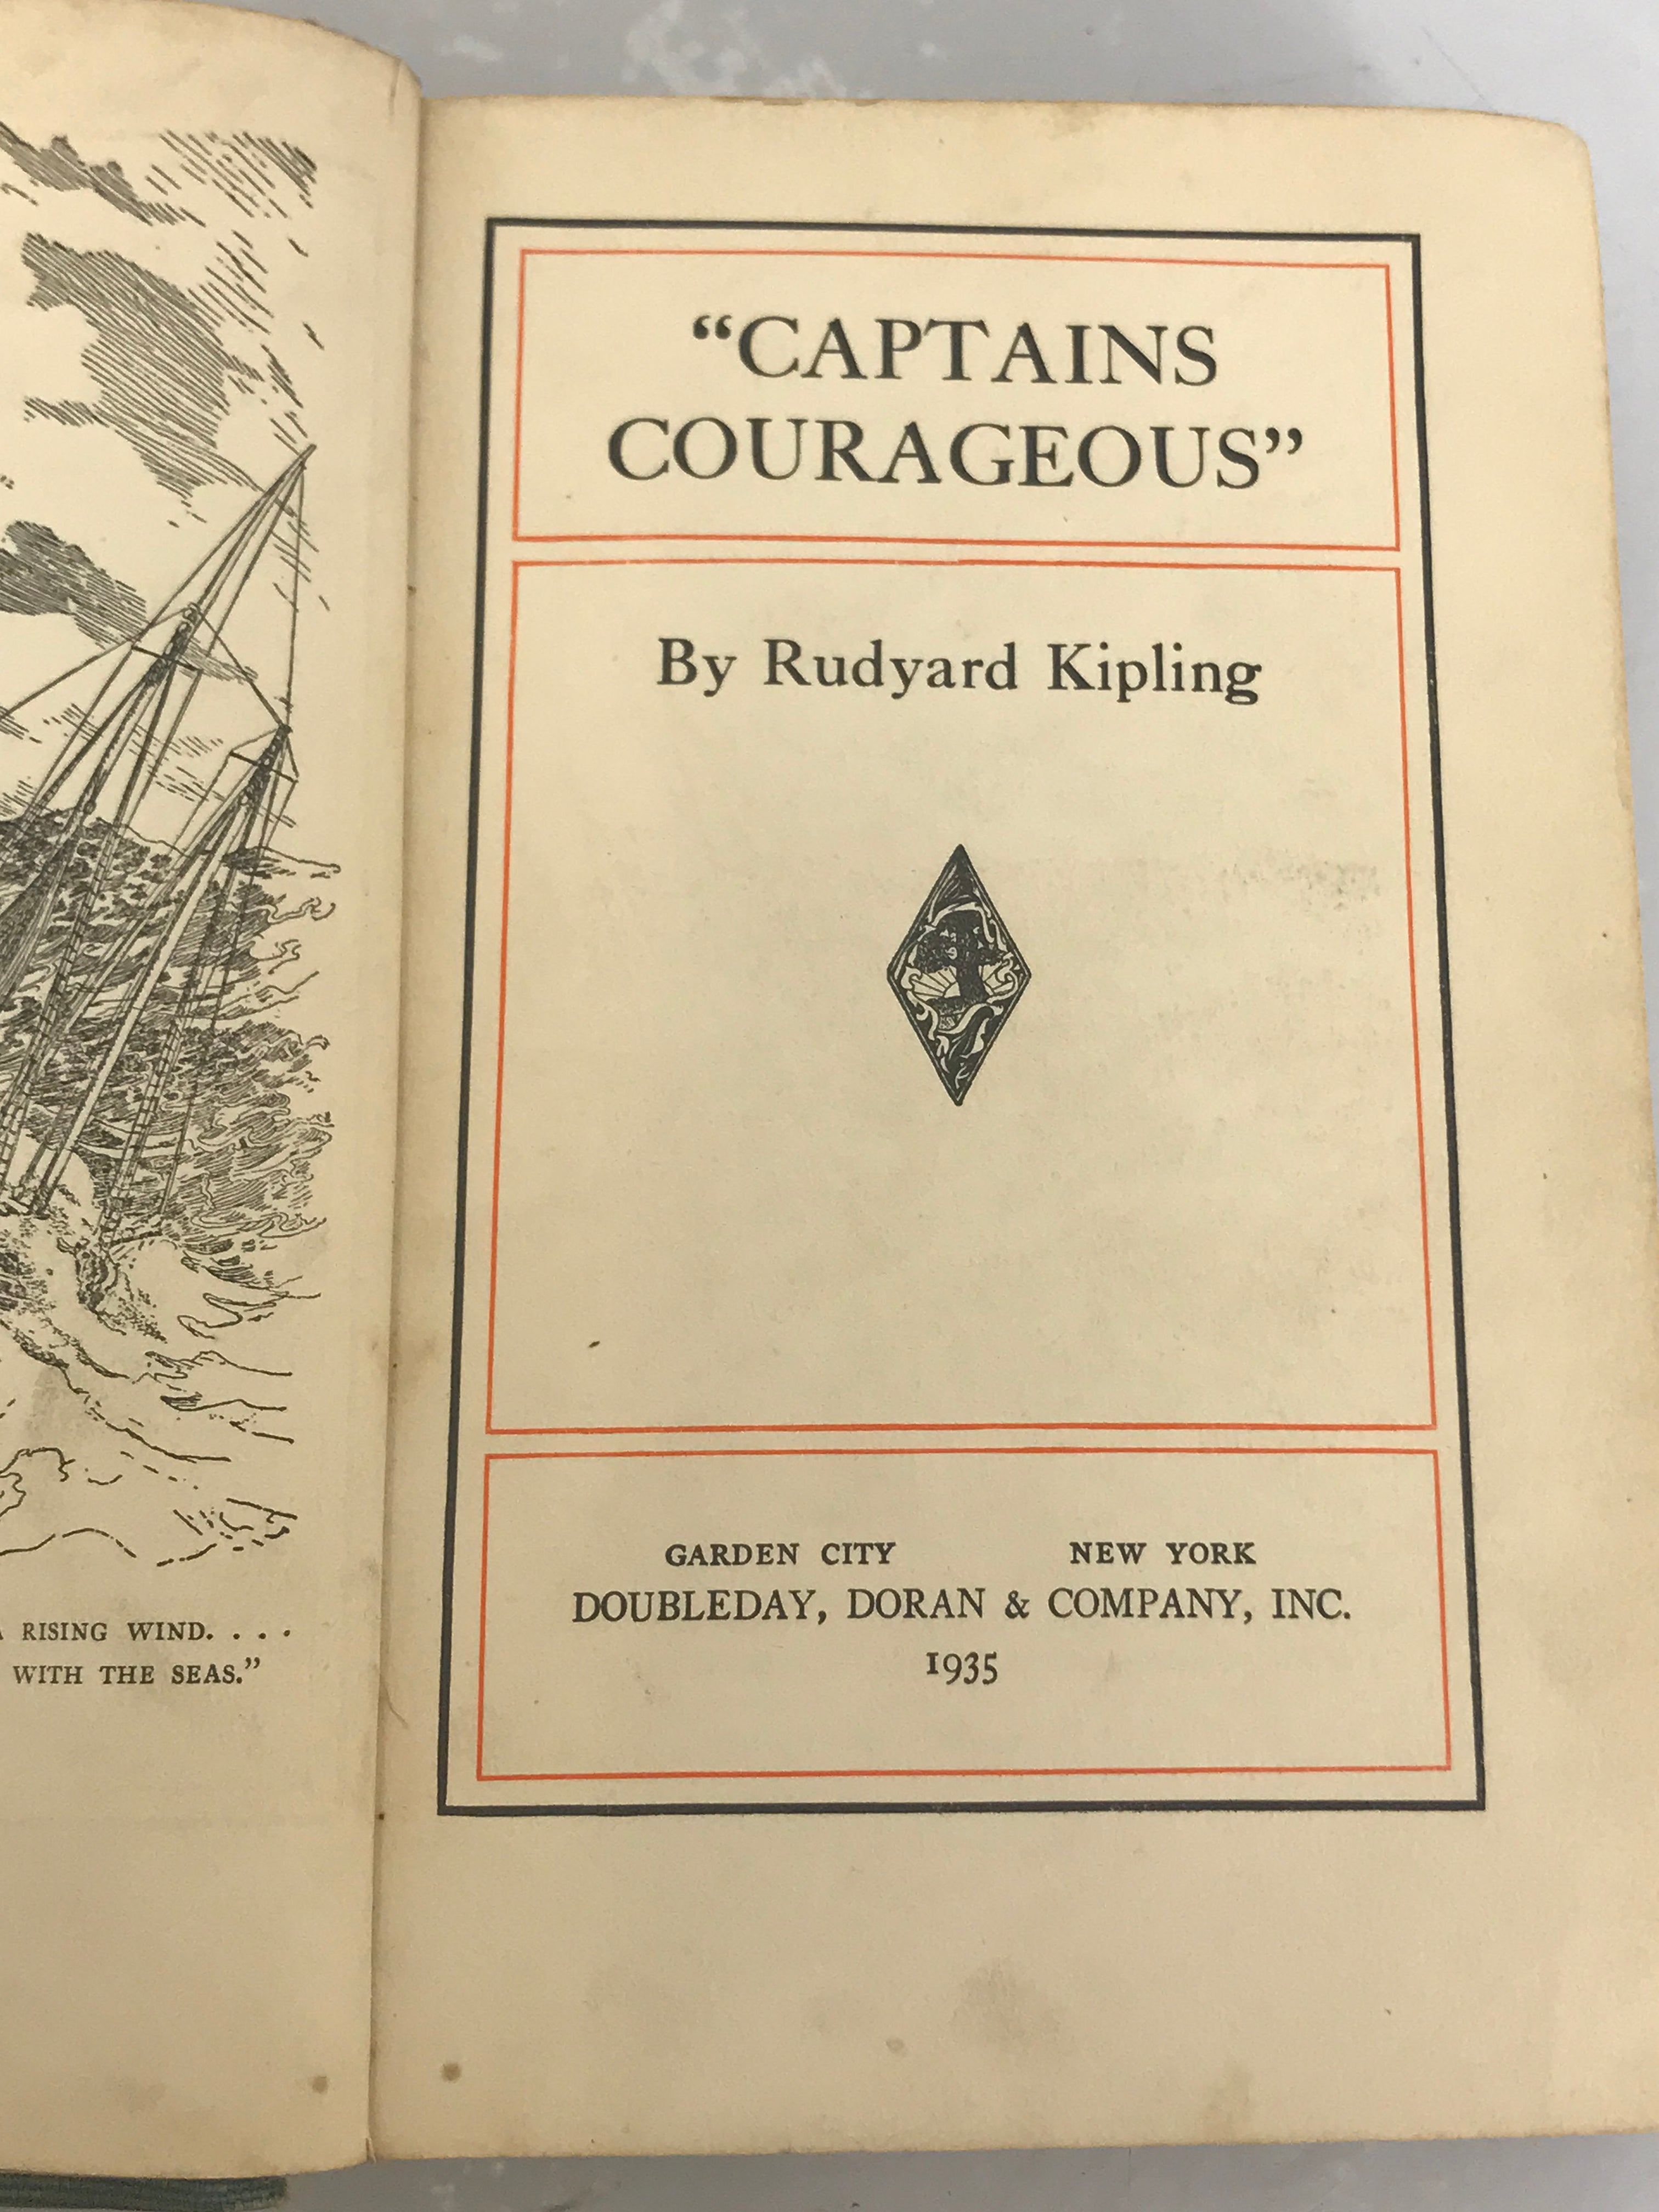 Lot of 2 Kipling Classics: "Captains Courageous" (1935) and A Selection of His Stories and Poems (1956) by Beecroft HC Vintage